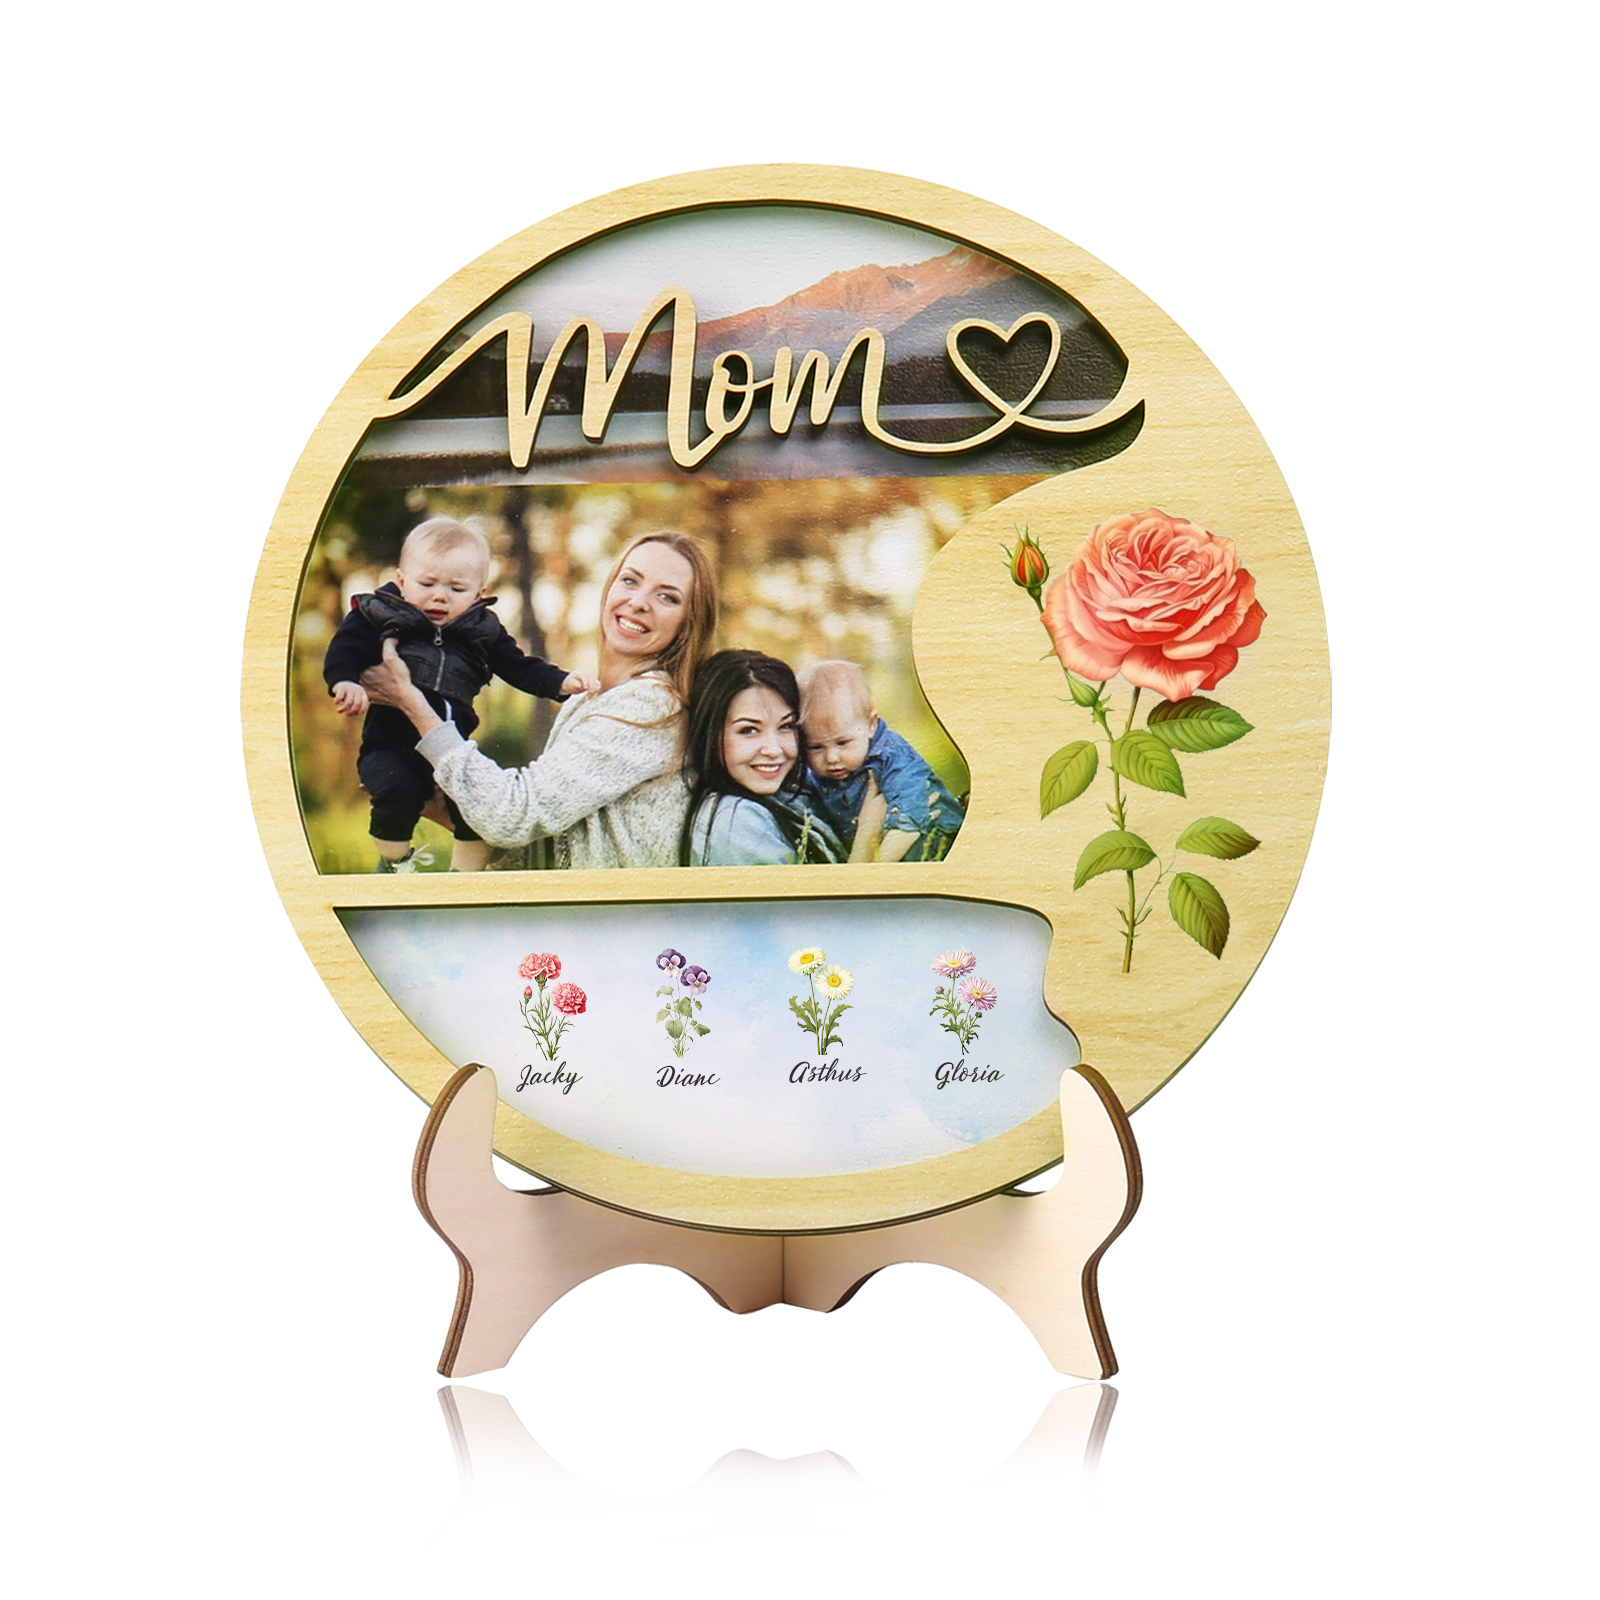 4 Names - Customized Photo Birth Flower Wooden Ornament Decoration for